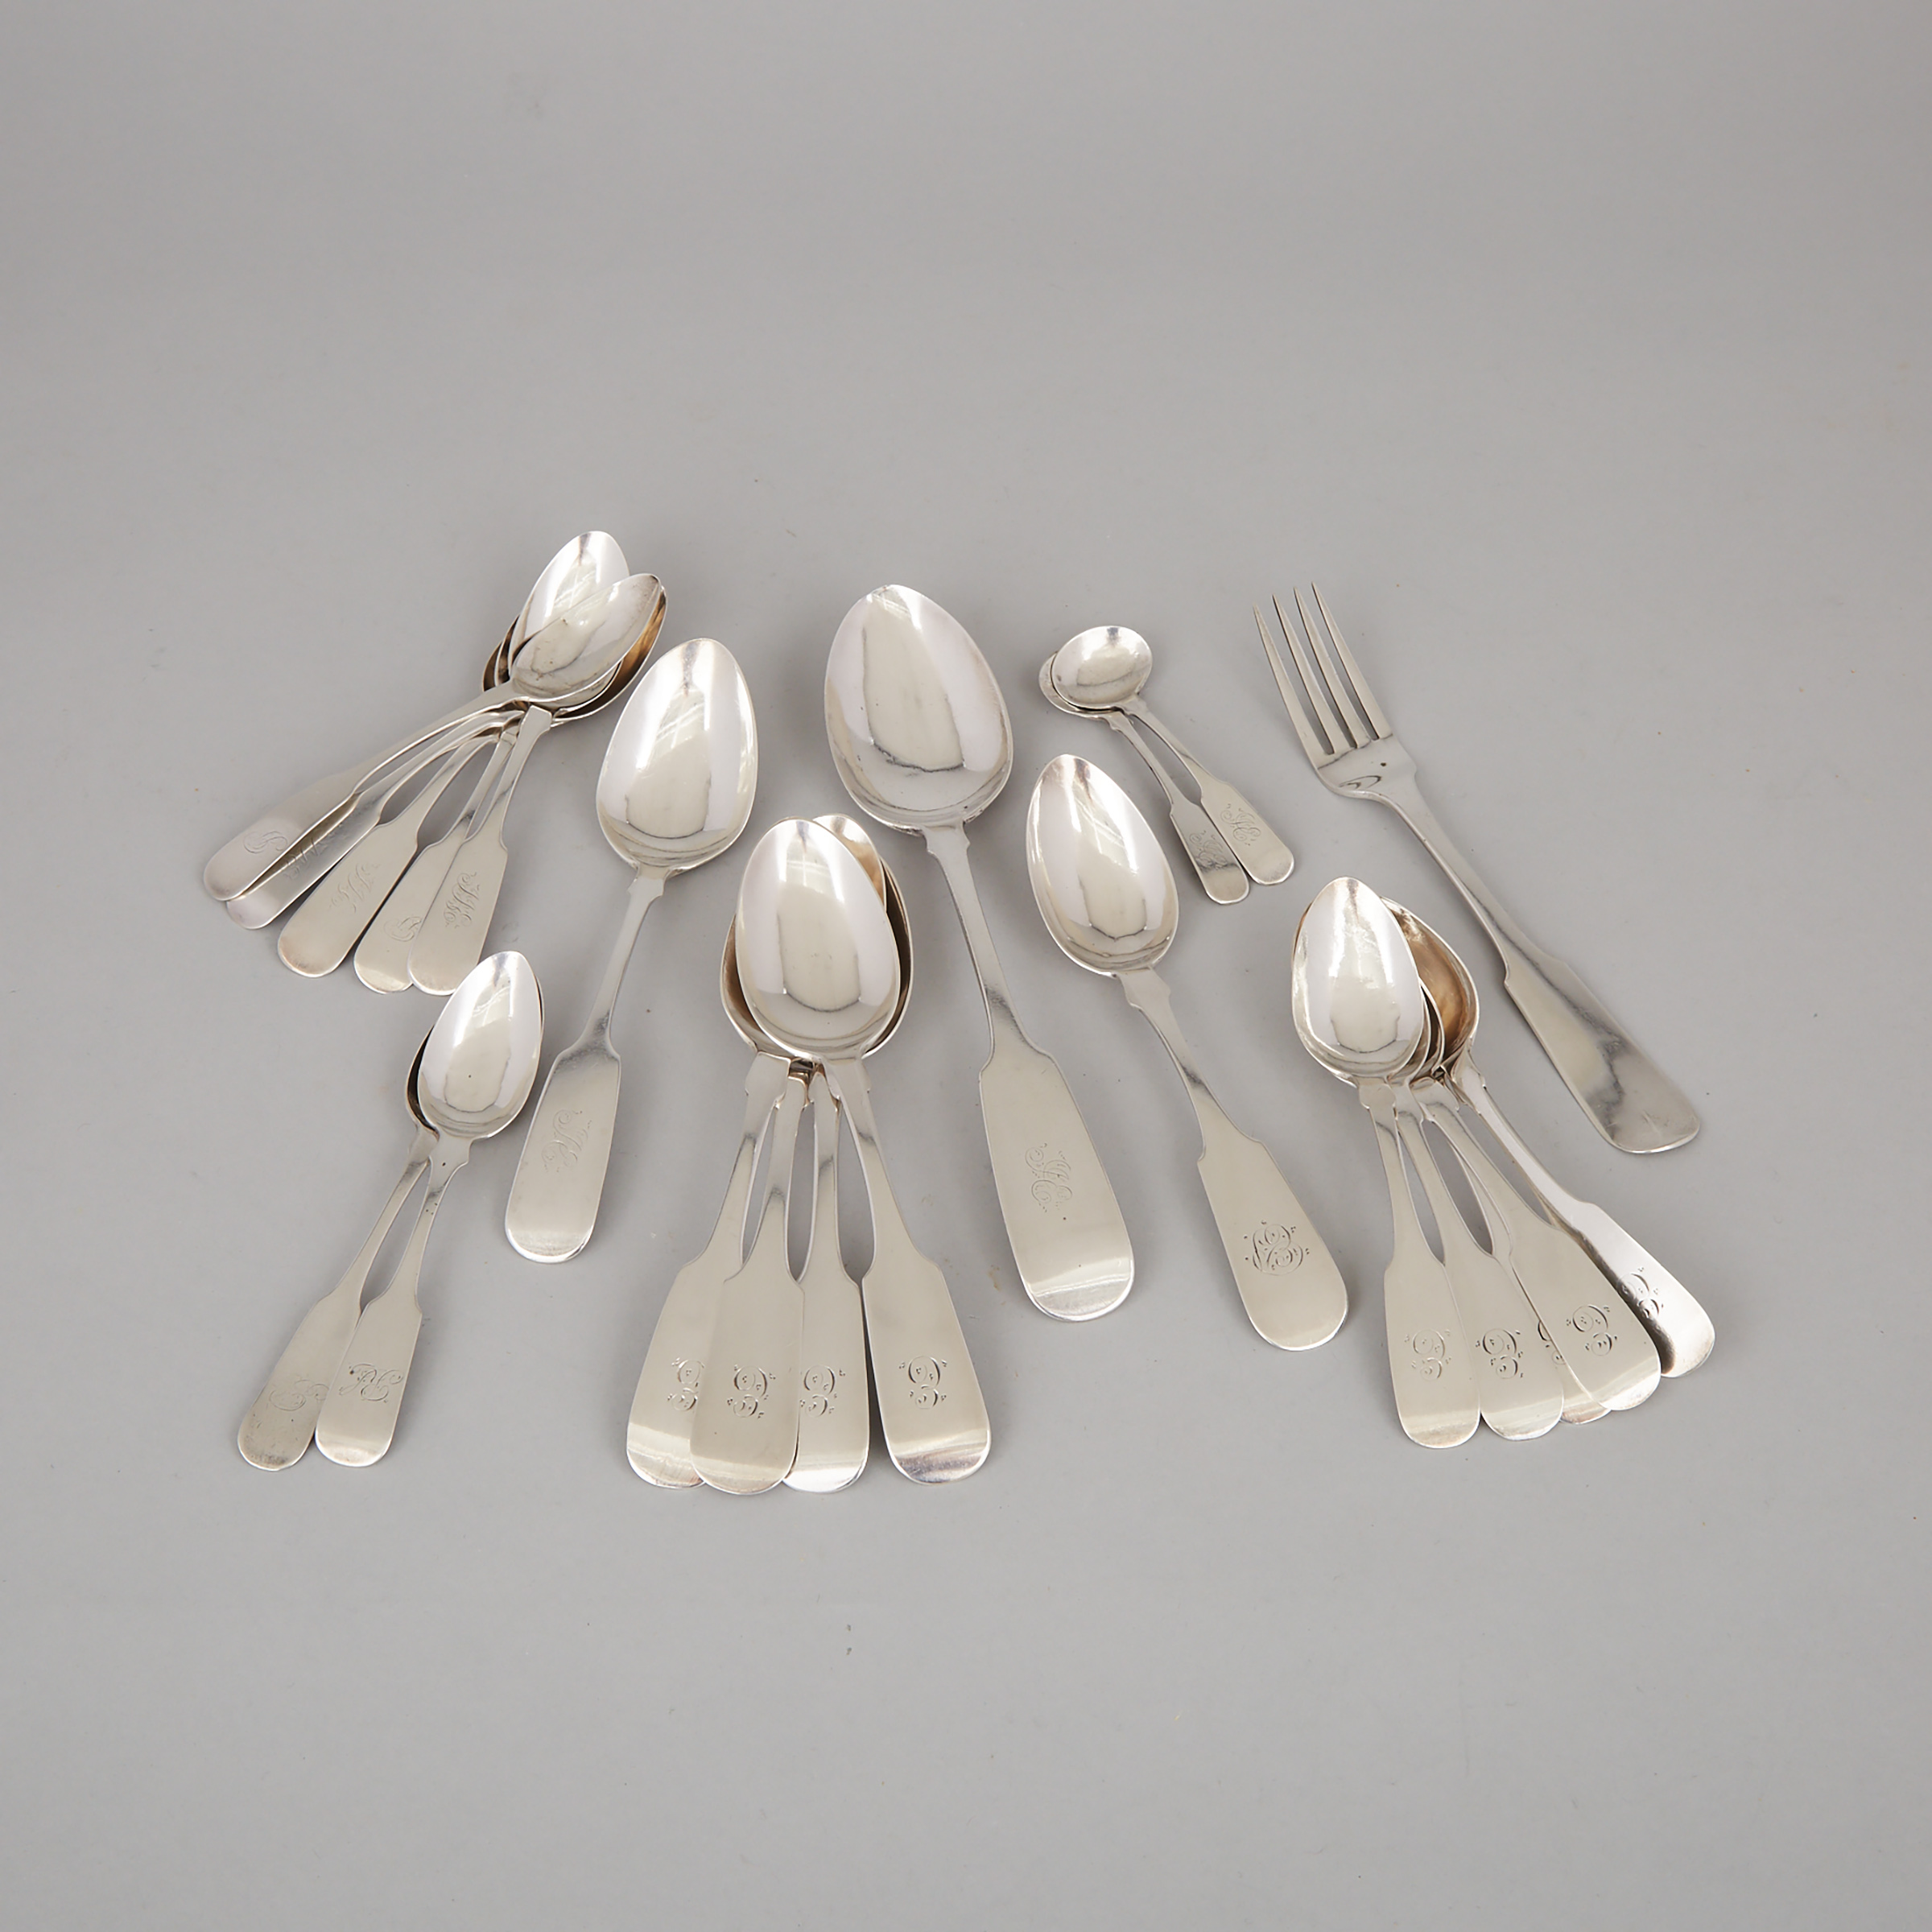 Canadian Silver Fiddle Pattern Flatware, Amos Page, Nova Scotia, mid-19th century